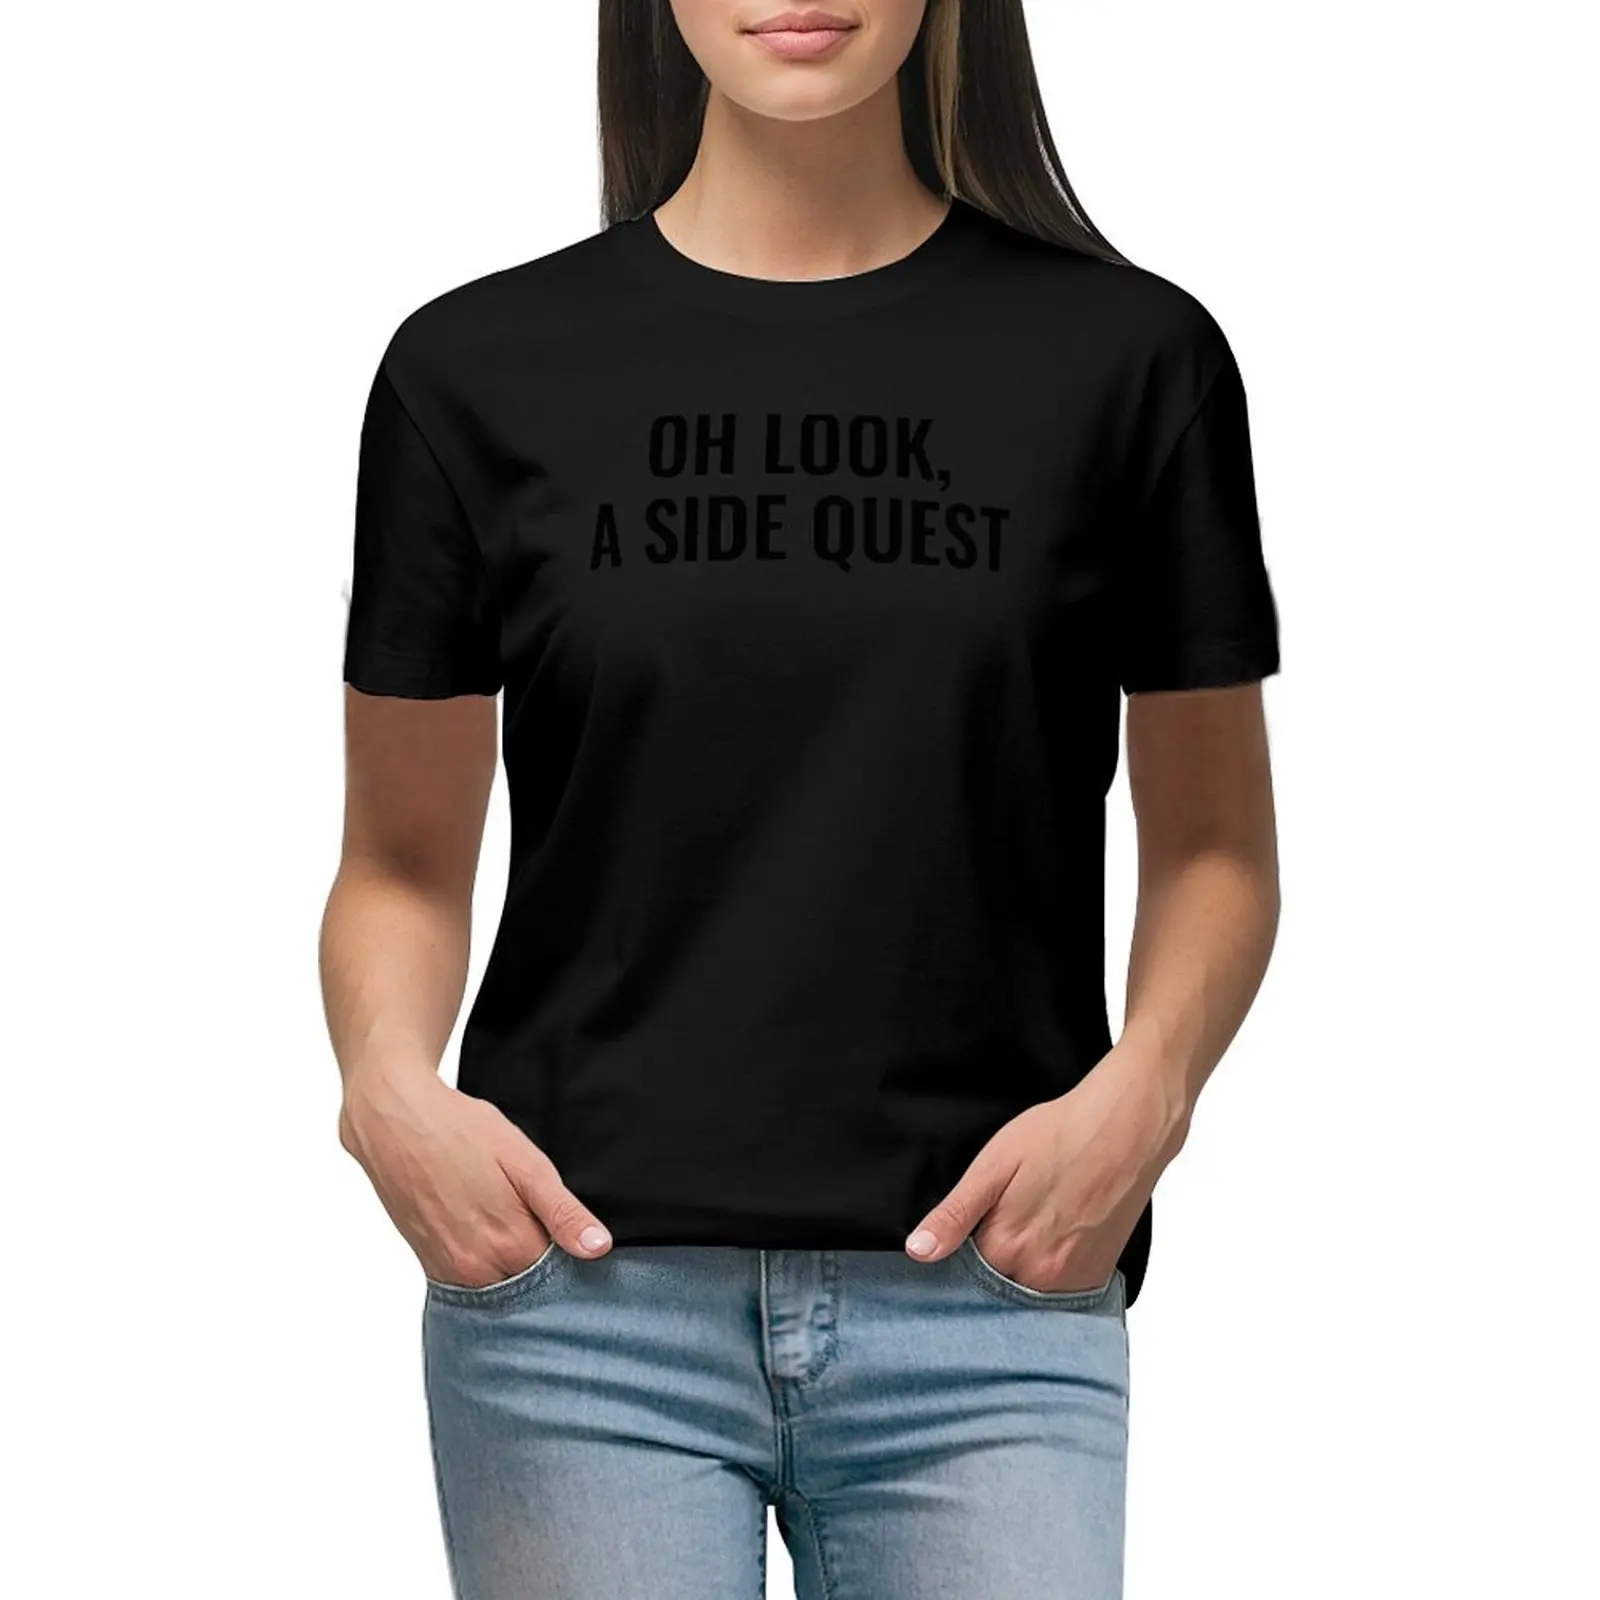 

Oh Look, A Side Quest Video Game Meme T-shirt animal print shirt for girls summer tops tshirts for Women